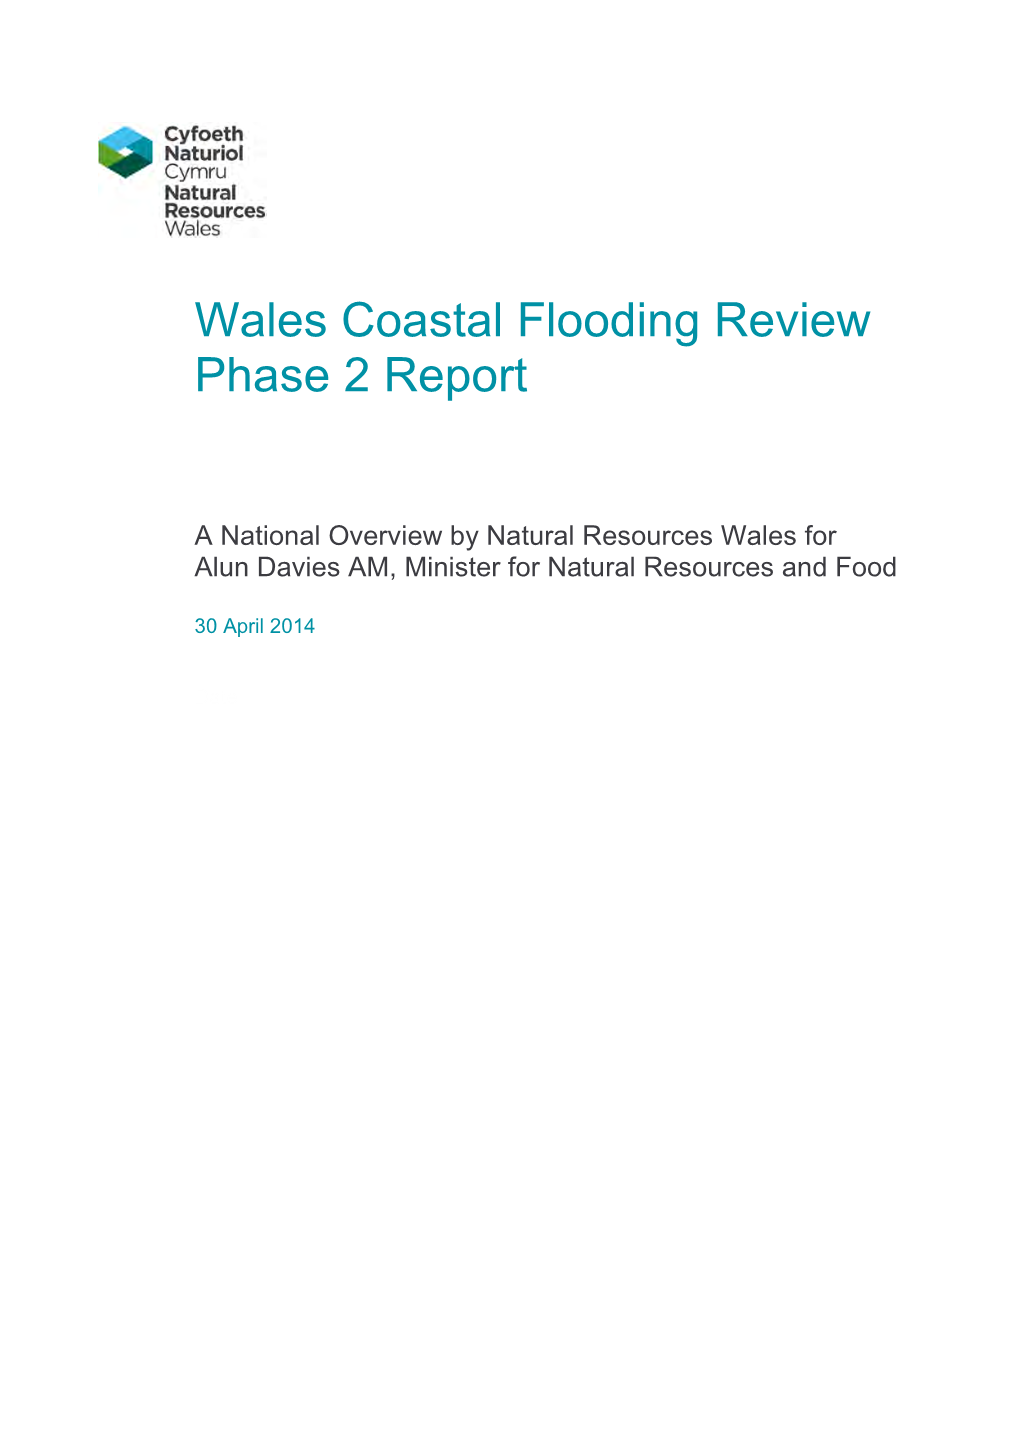 Wales Coastal Flooding Review Phase 2 Report